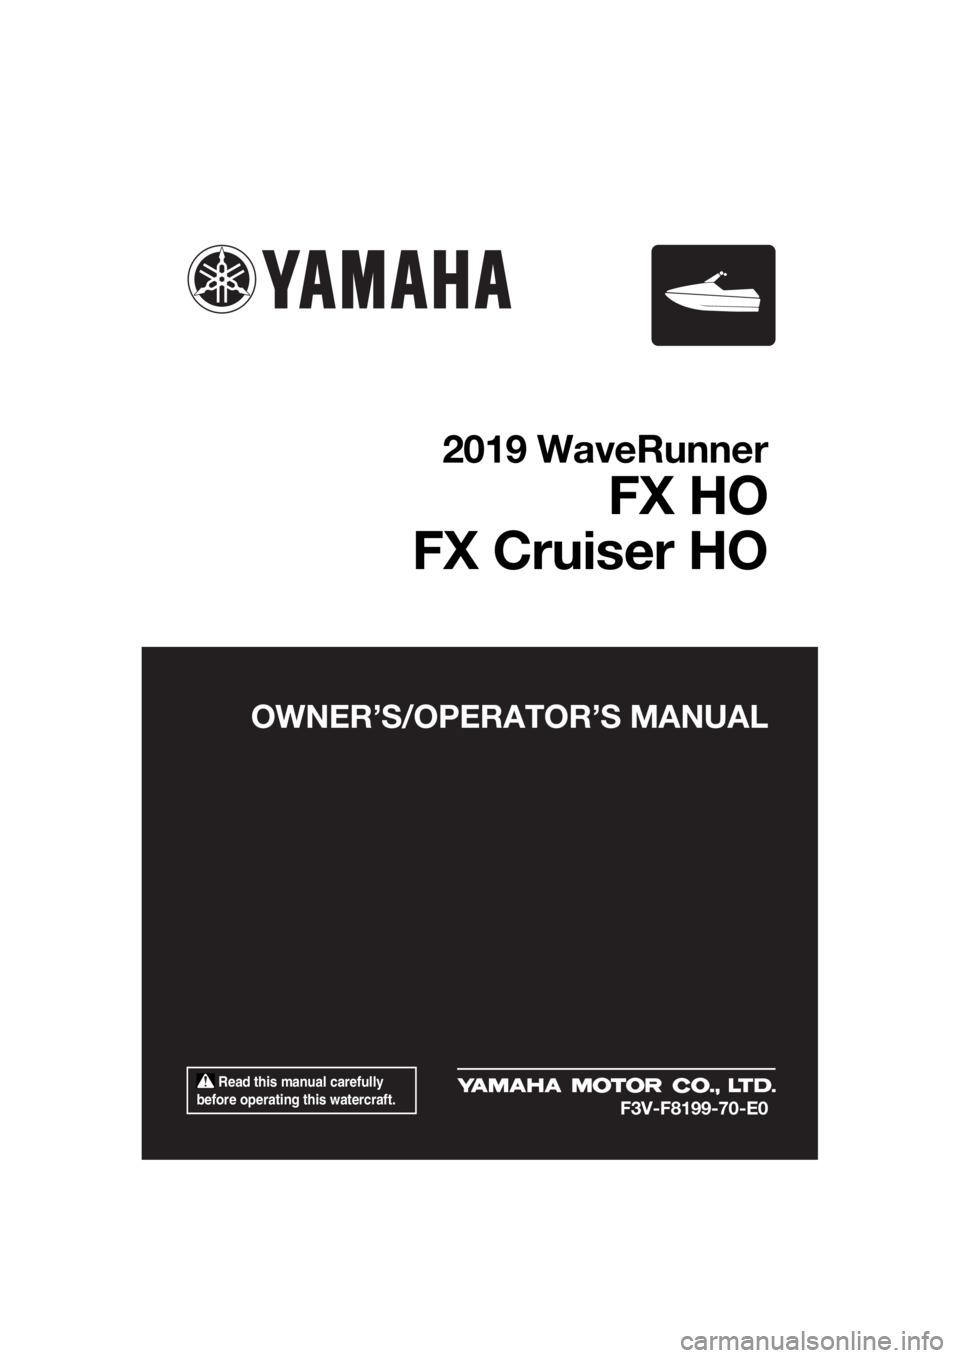 YAMAHA FX HO CRUISER 2019  Owners Manual  Read this manual carefully 
before operating this watercraft.
OWNER’S/OPERATOR’S MANUAL
2019 WaveRunner
FX HO
FX Cruiser HO
F3V-F8199-70-E0
UF3V70E0.book  Page 1  Tuesday, August 28, 2018  10:16 